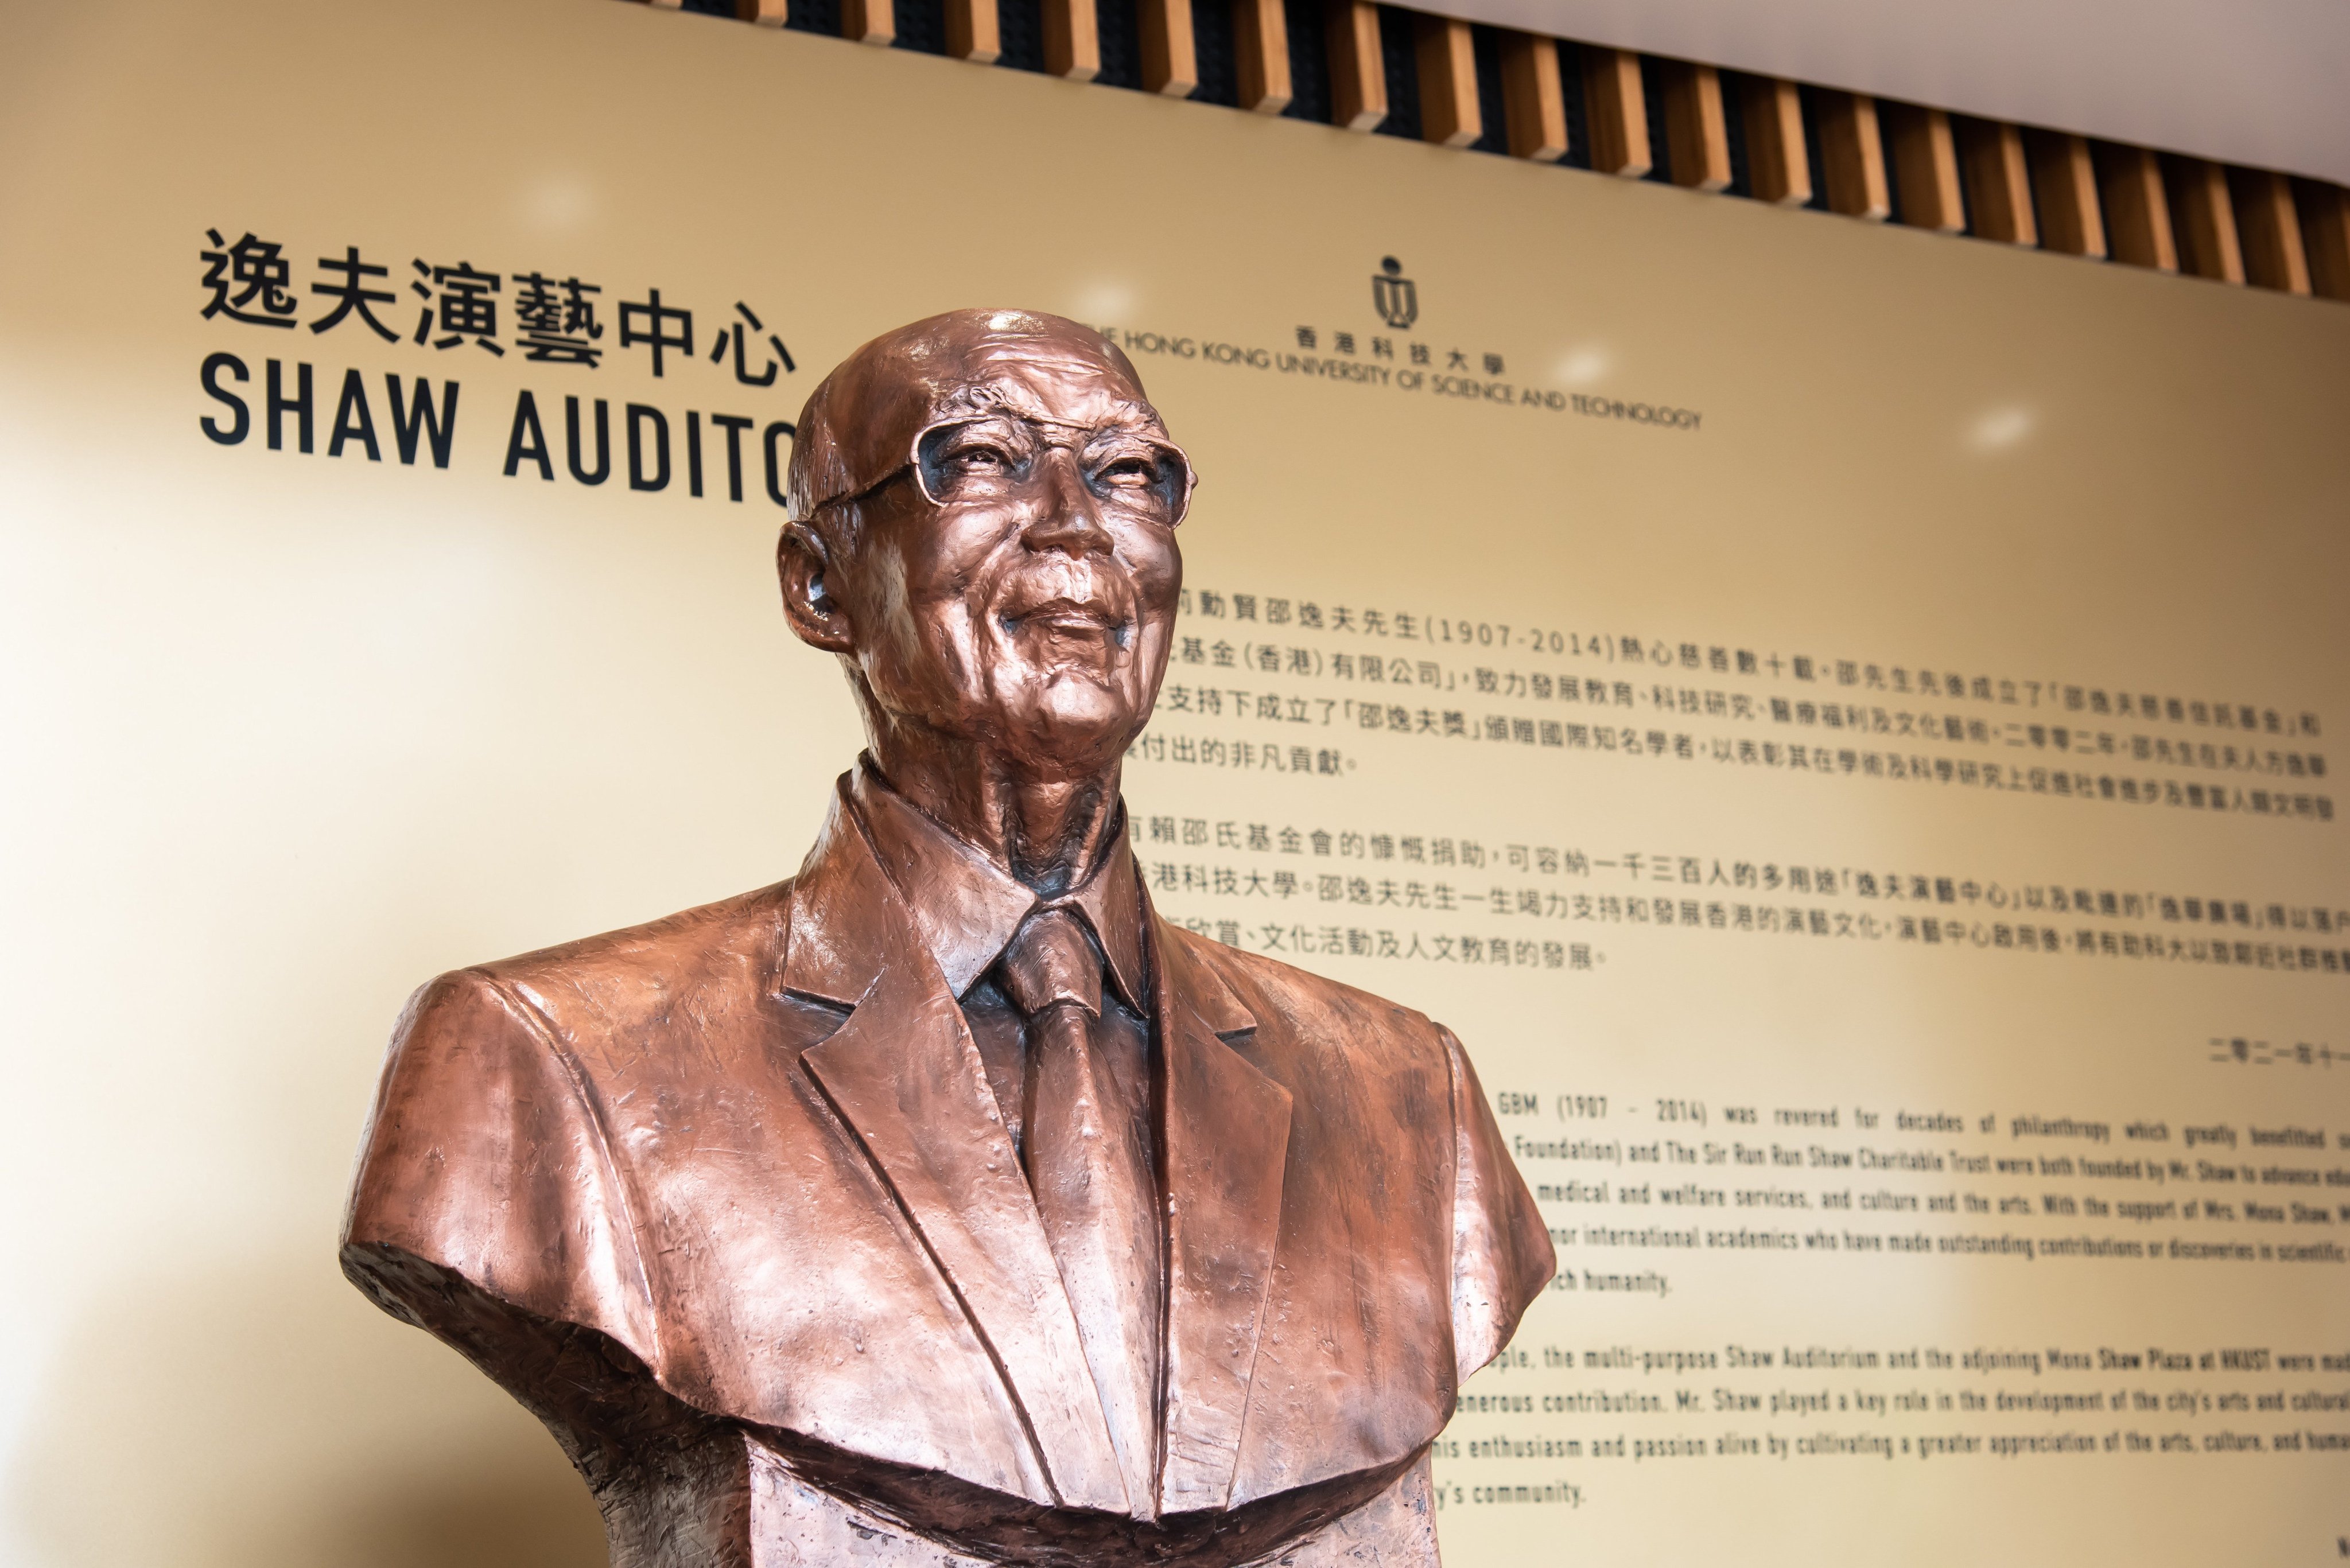 The foundation hopes local entrepreneurs will follow in the footsteps of the late Run Run Shaw and give back to the community. Photo: Handout